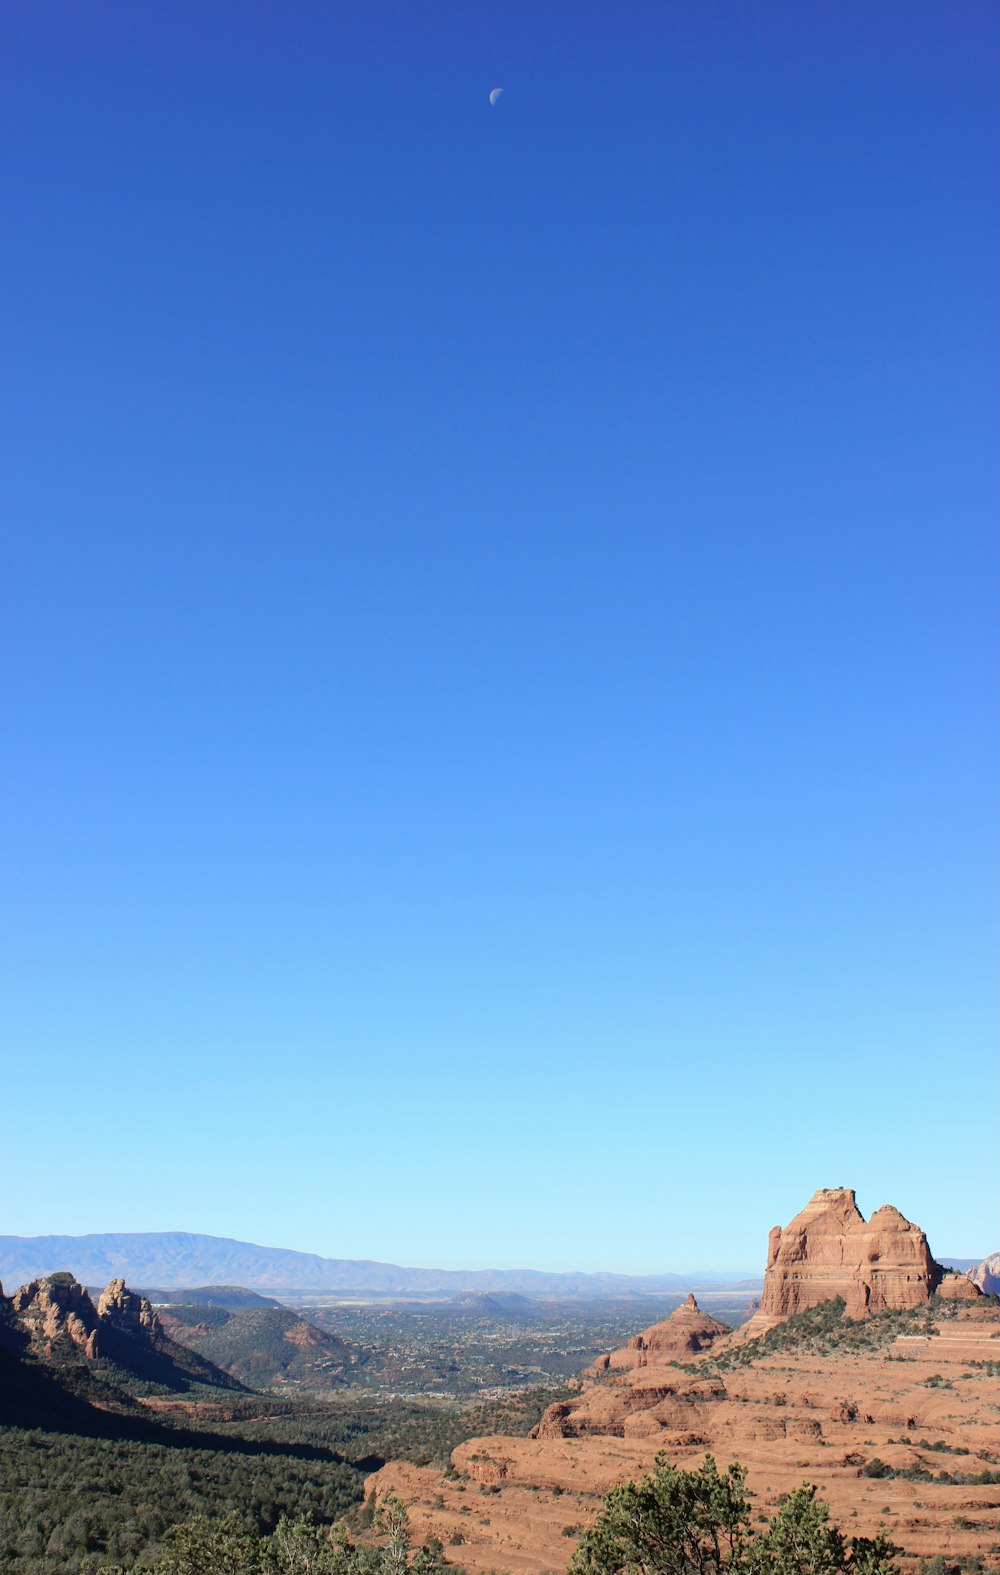 a view of a mountain range with a clear blue sky